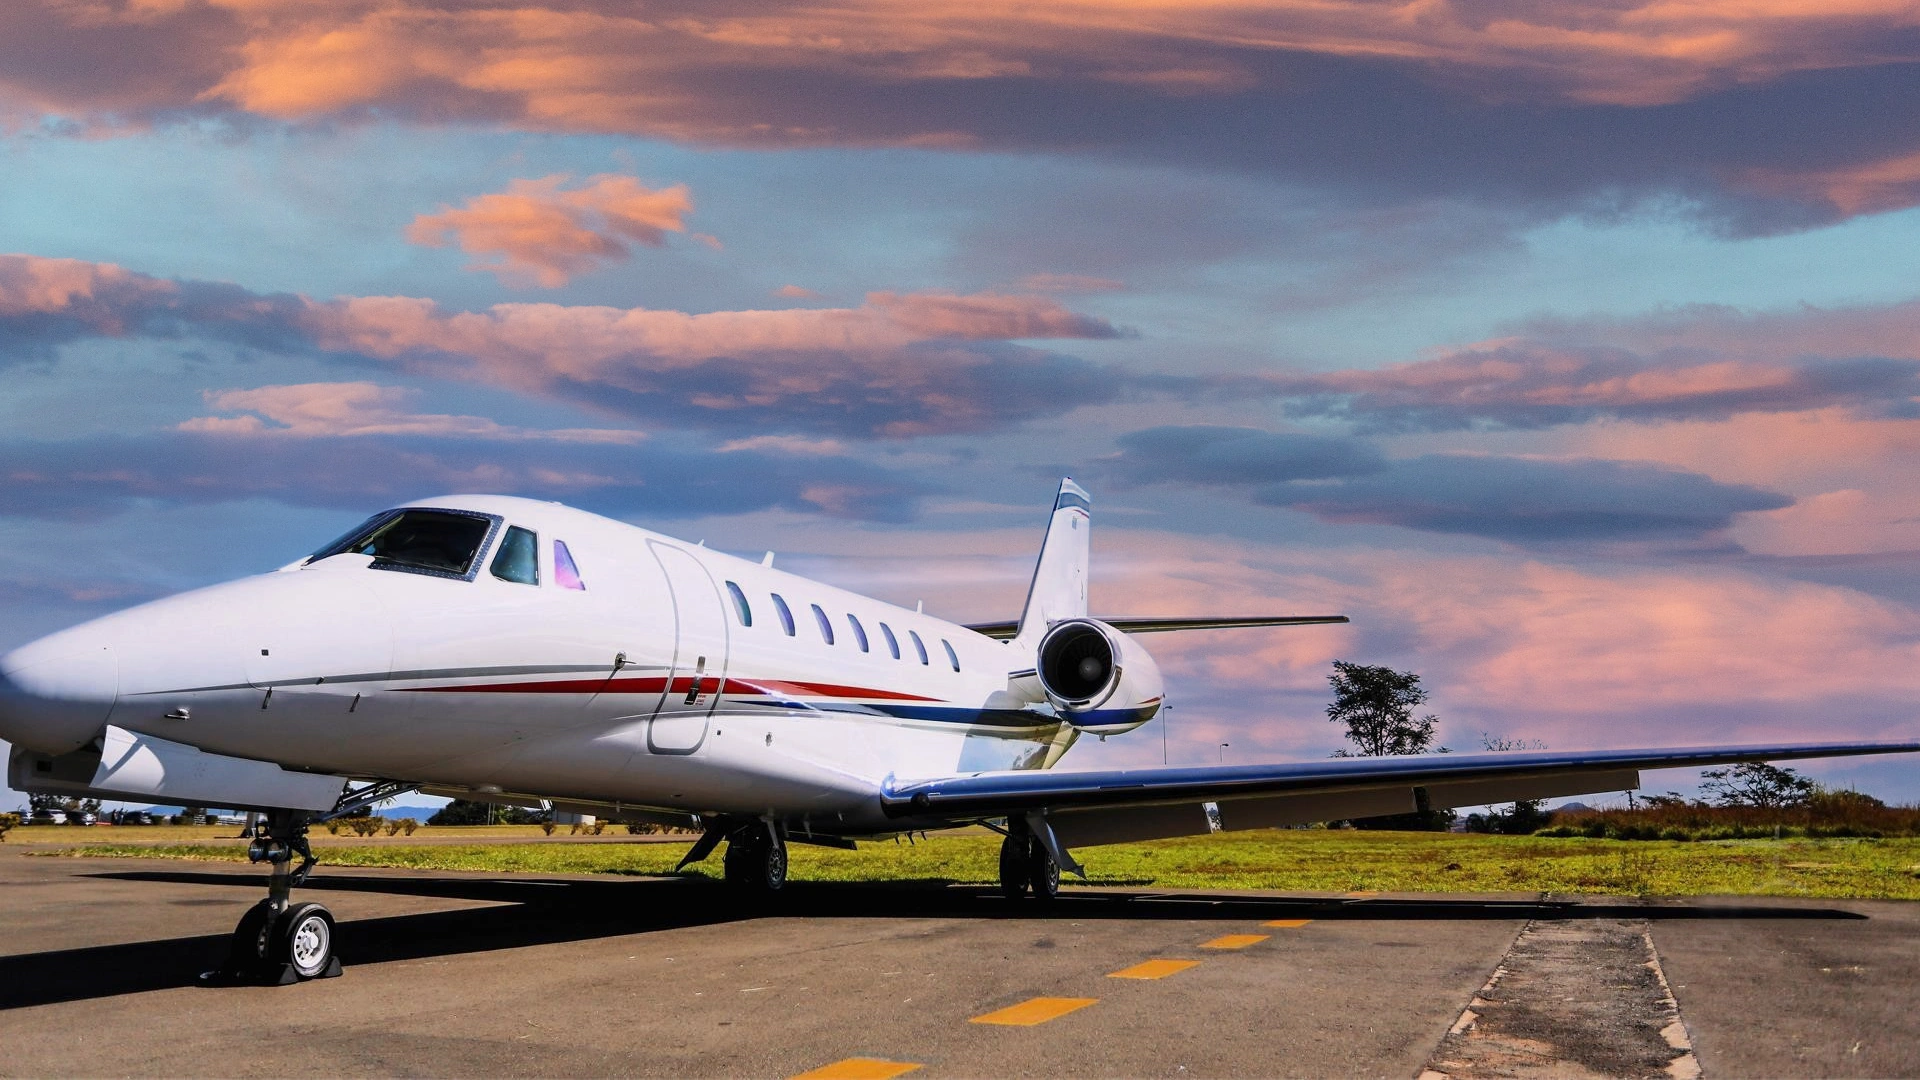 Alerion Citation Sovereign - N595AB available for private charter by Alerion Aviation.